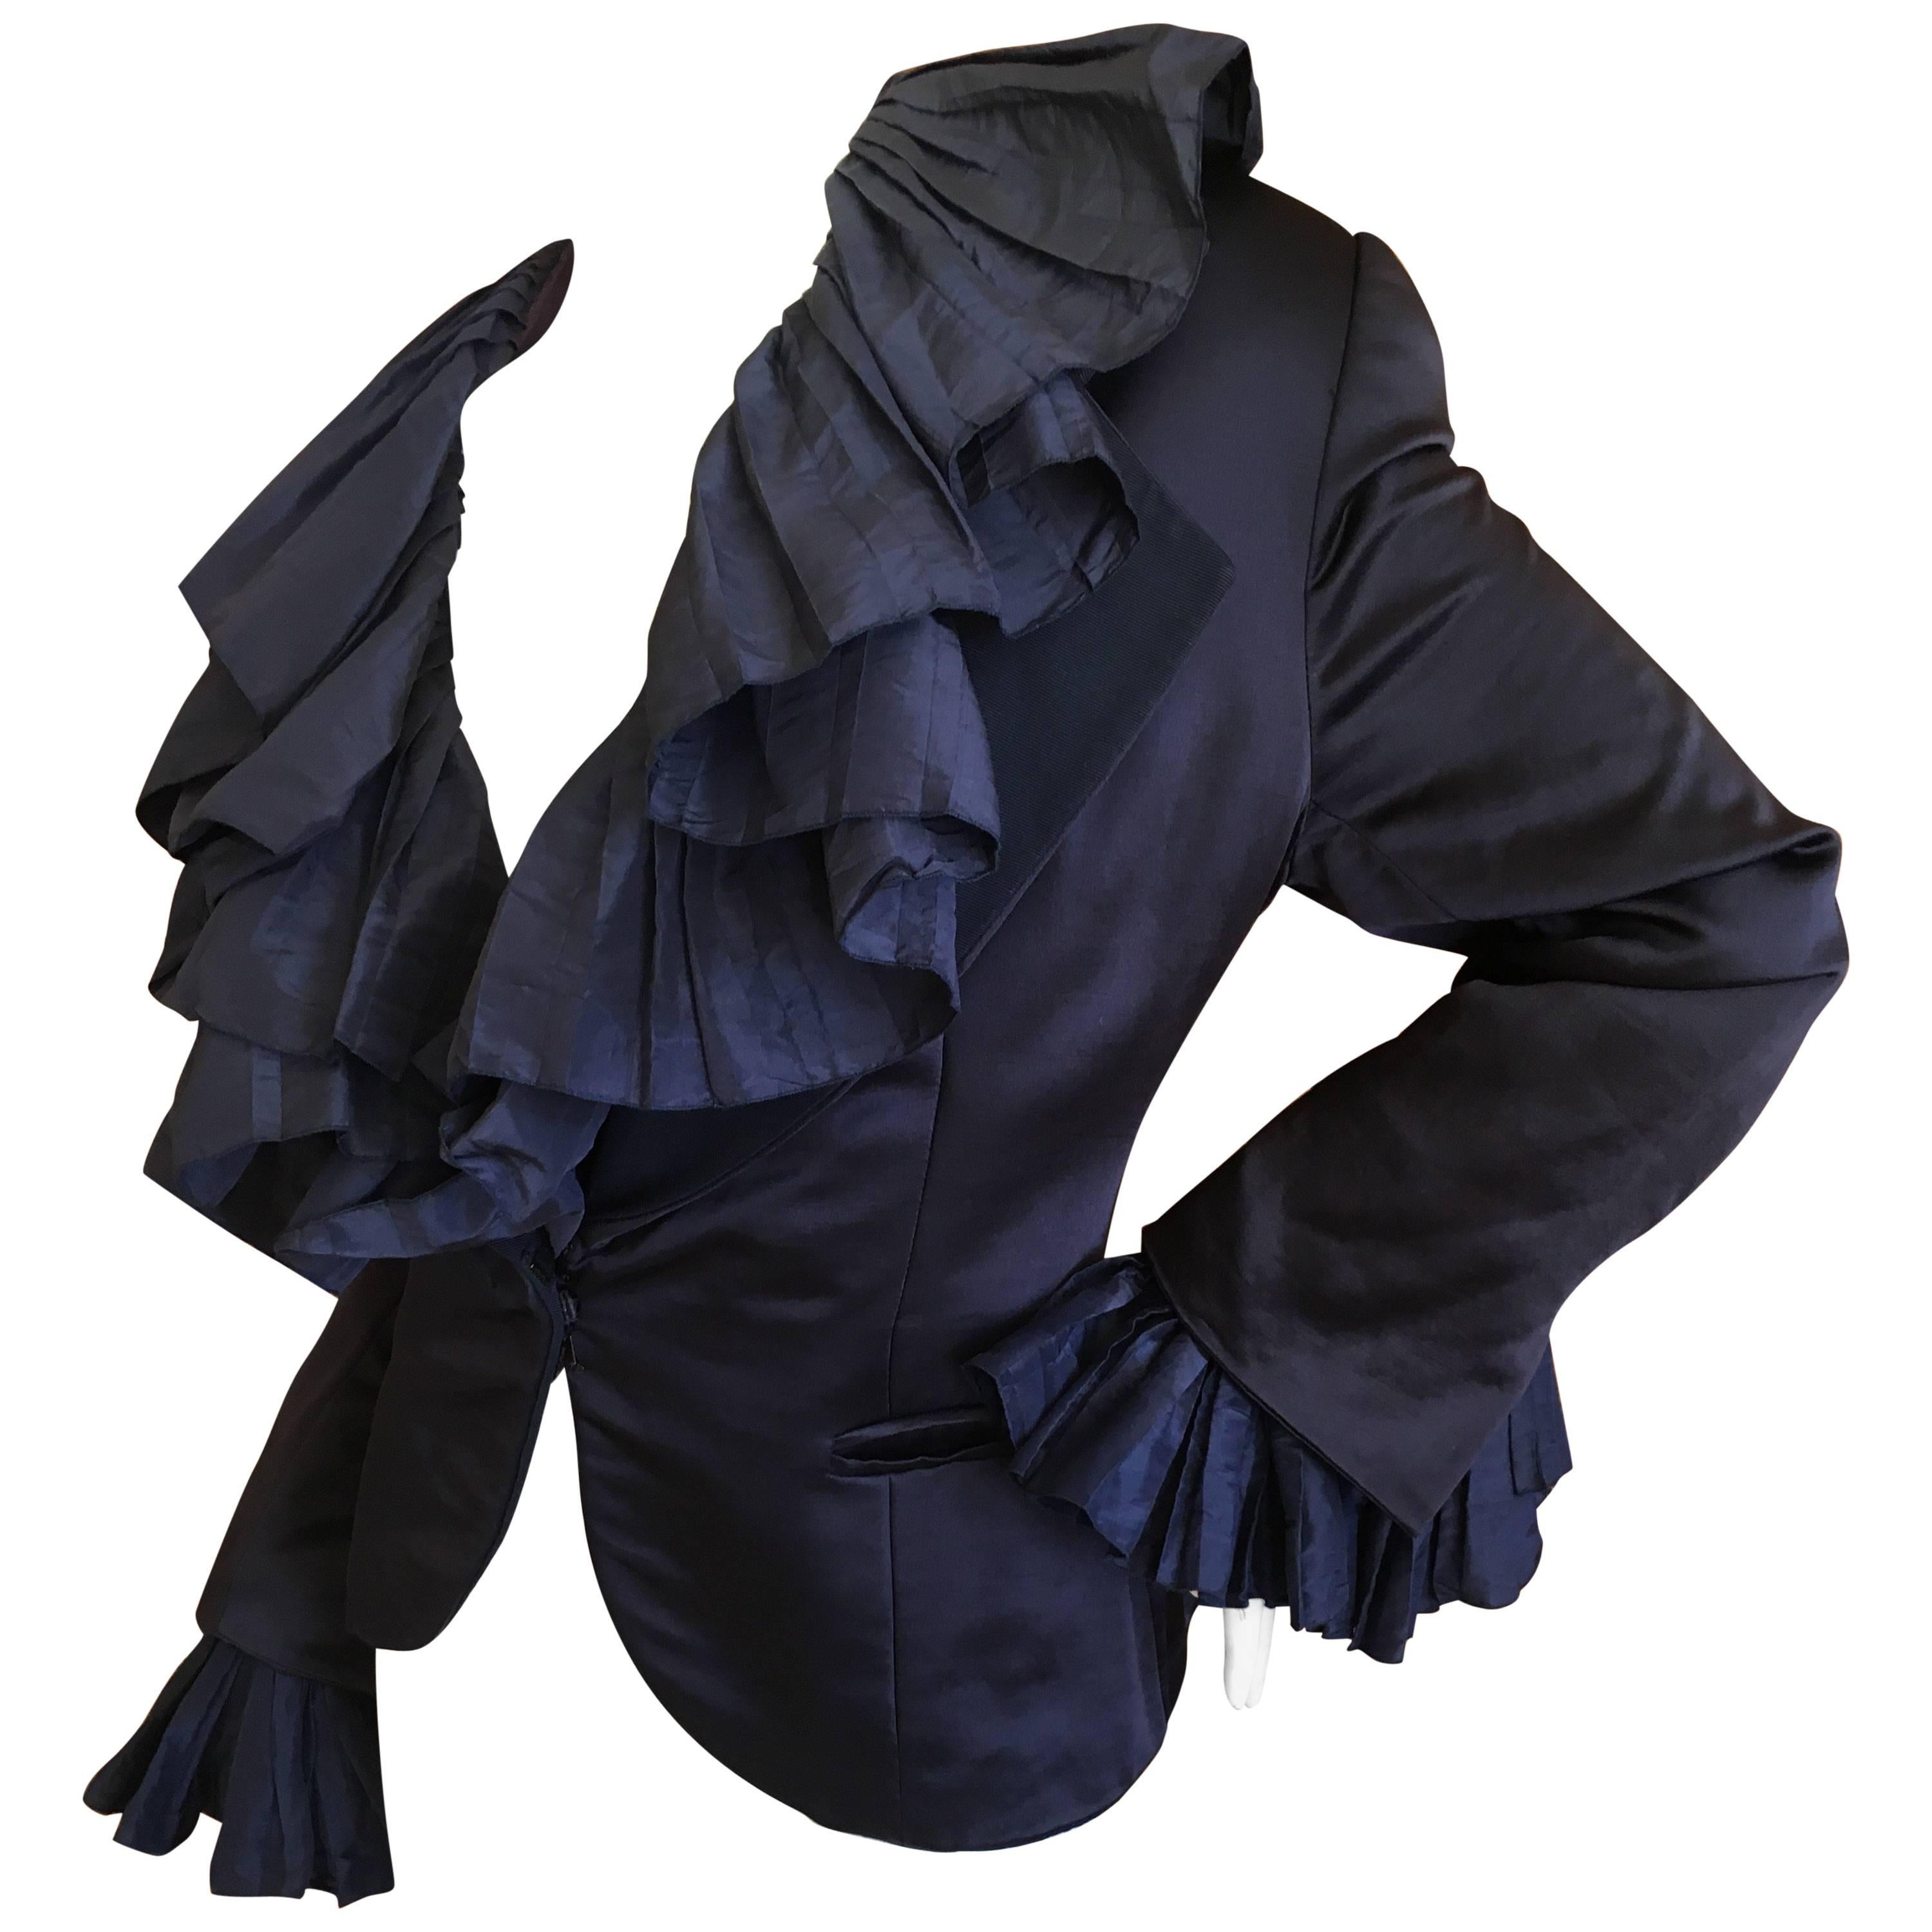 Christian Dior Numbered Demi Couture Ruffled Silk Jacket by Gianfranco Ferre XL For Sale